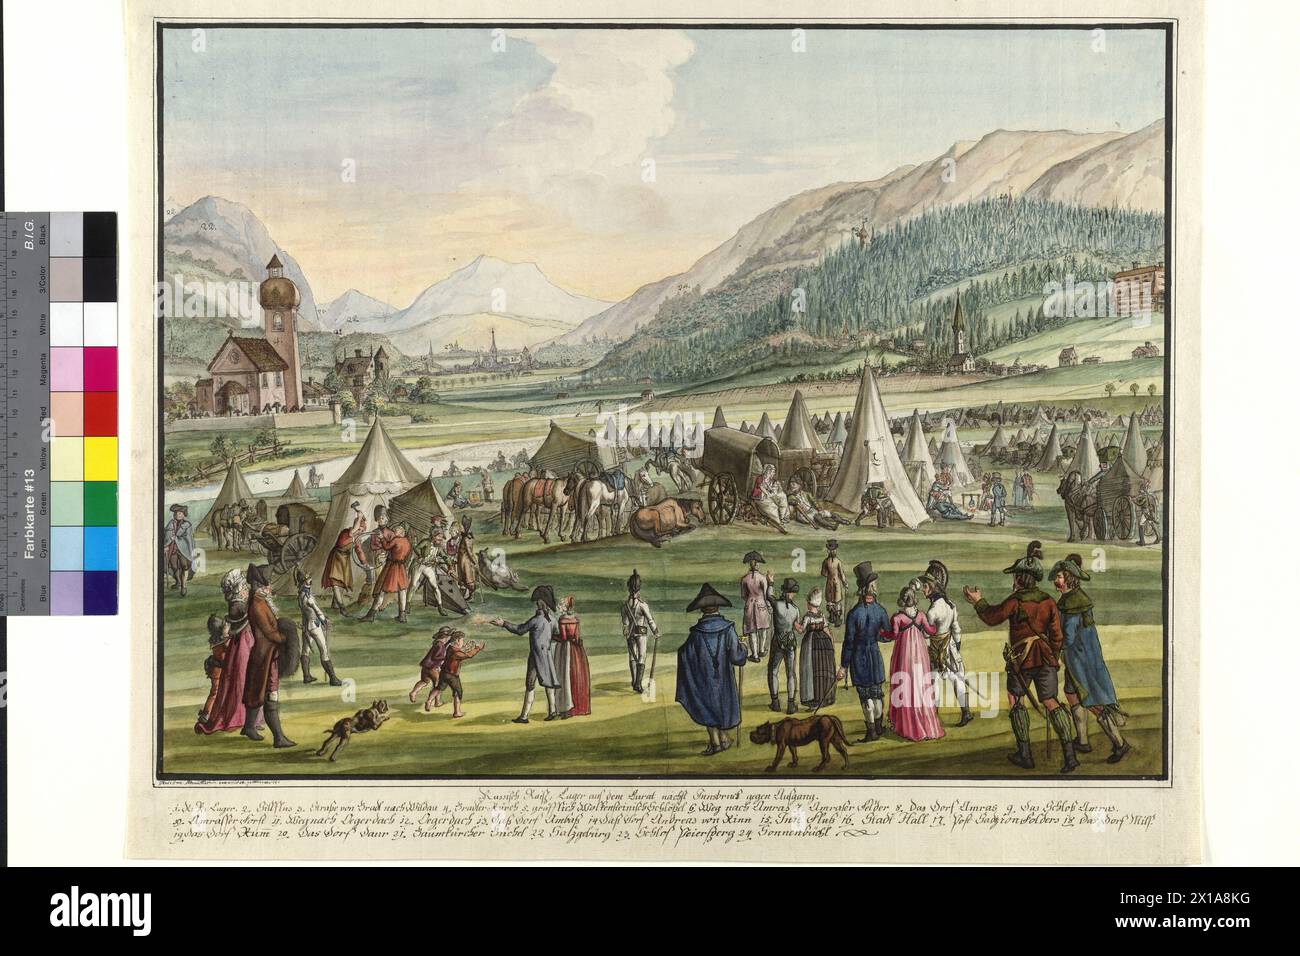 Imperial Russian encampment on the Neurauth at Innsbruck 1799, scene from the 2nd coalition war, alliance of Austria, Russia and England against Napoleon encampment of the Russian army of help at Innsbruck, 26.9.1799, in the foreground bourgeois and peasants as observer and visitor, view into Inn Valley against sunrise, on the left church of Pradl, city reverberation, on the right village Amras and castle ambergris. further details draw in places: Egerdach, Ampass, Rinn, Mils, rum, Volders, Baumkirchen, Thaur painted in watercolors pen drawing in sable on cardboard by Jacob Placidus retired mo Stock Photo